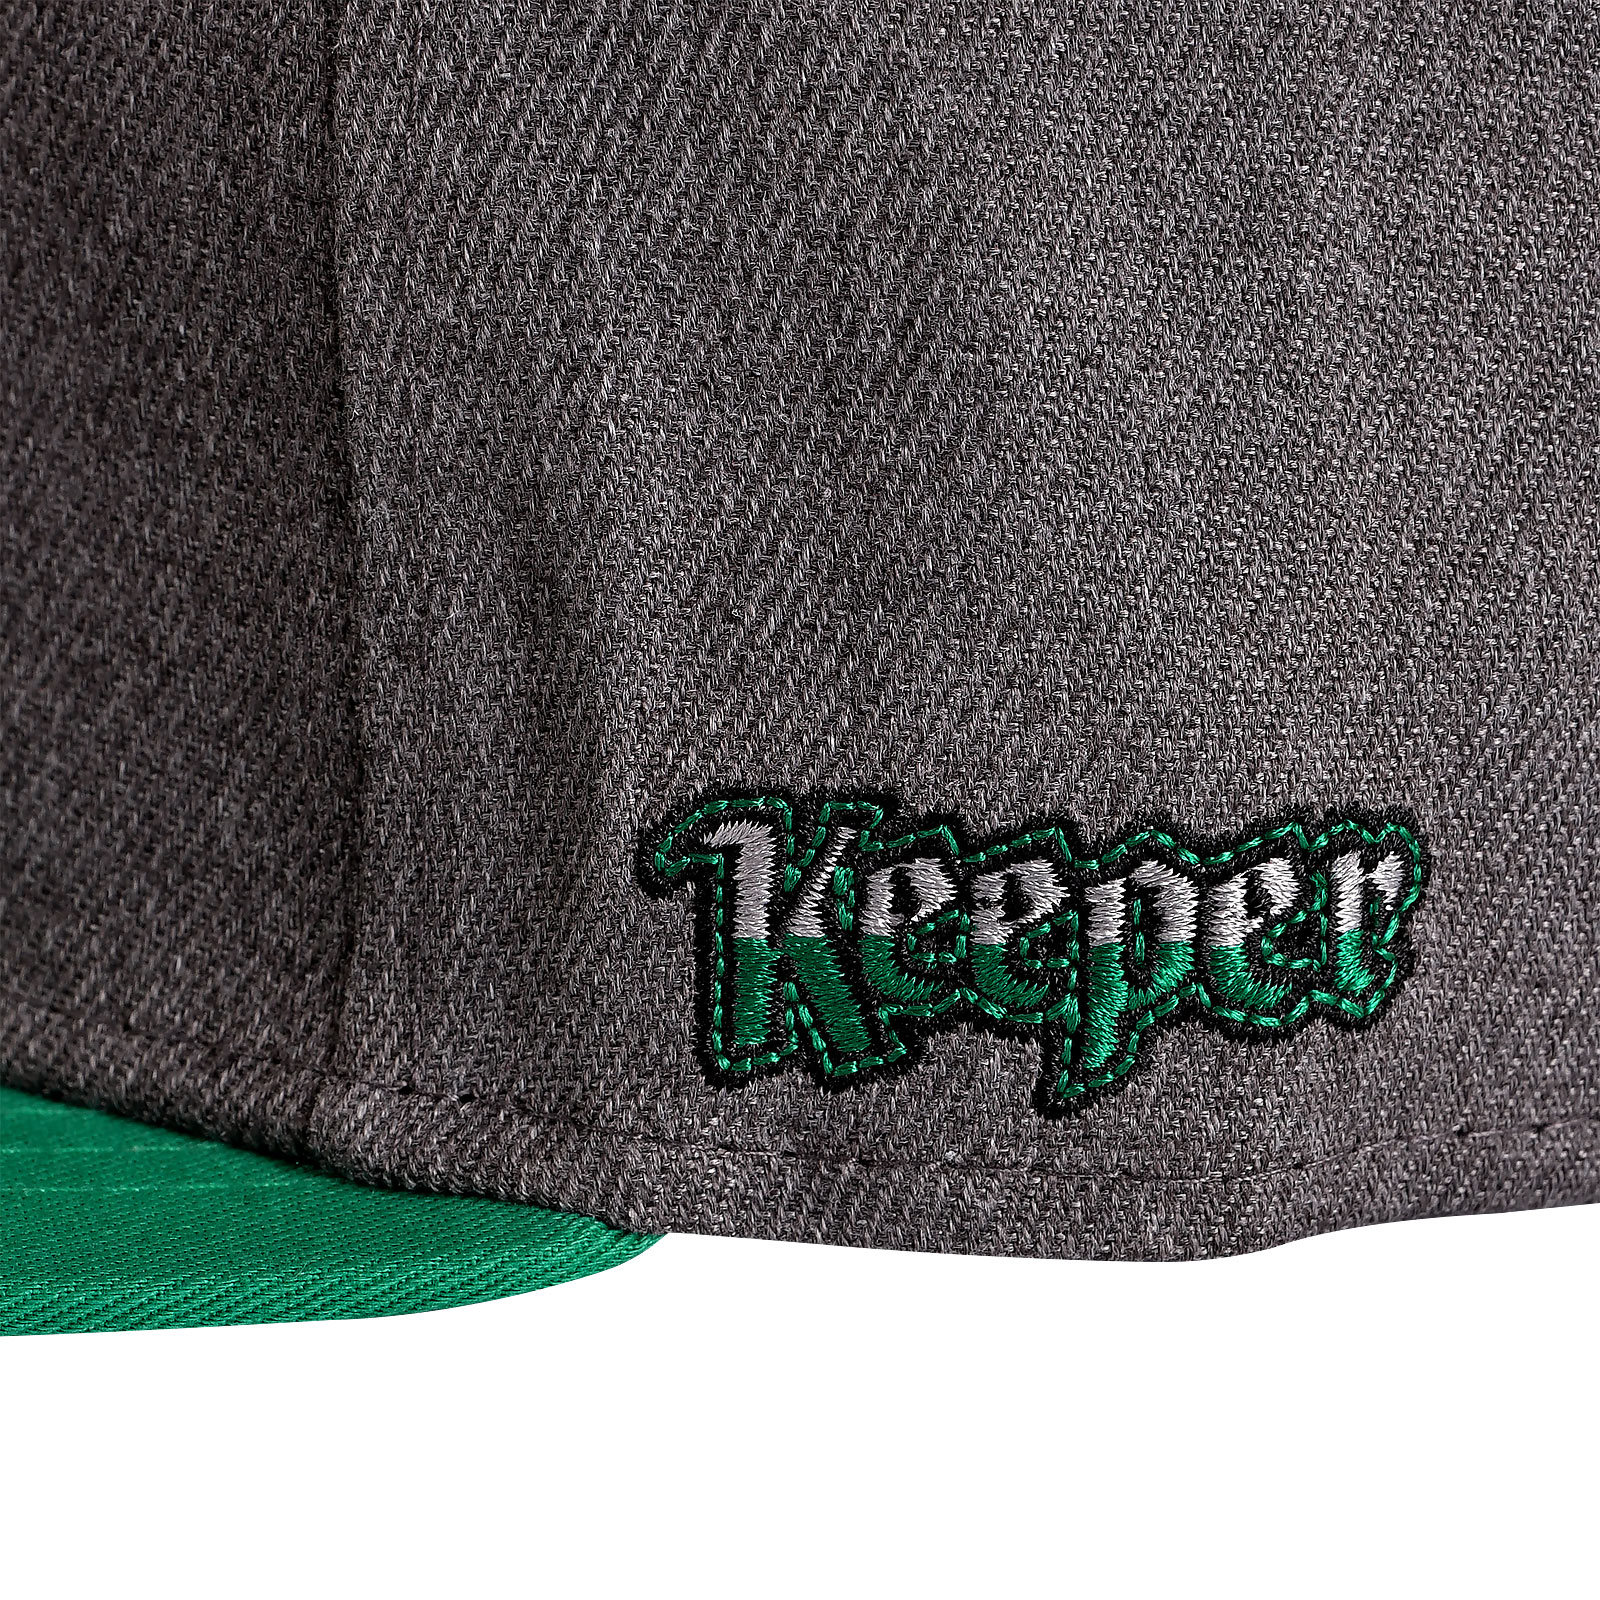 Harry Potter - Casquette Snapback Quidditch Slytherin